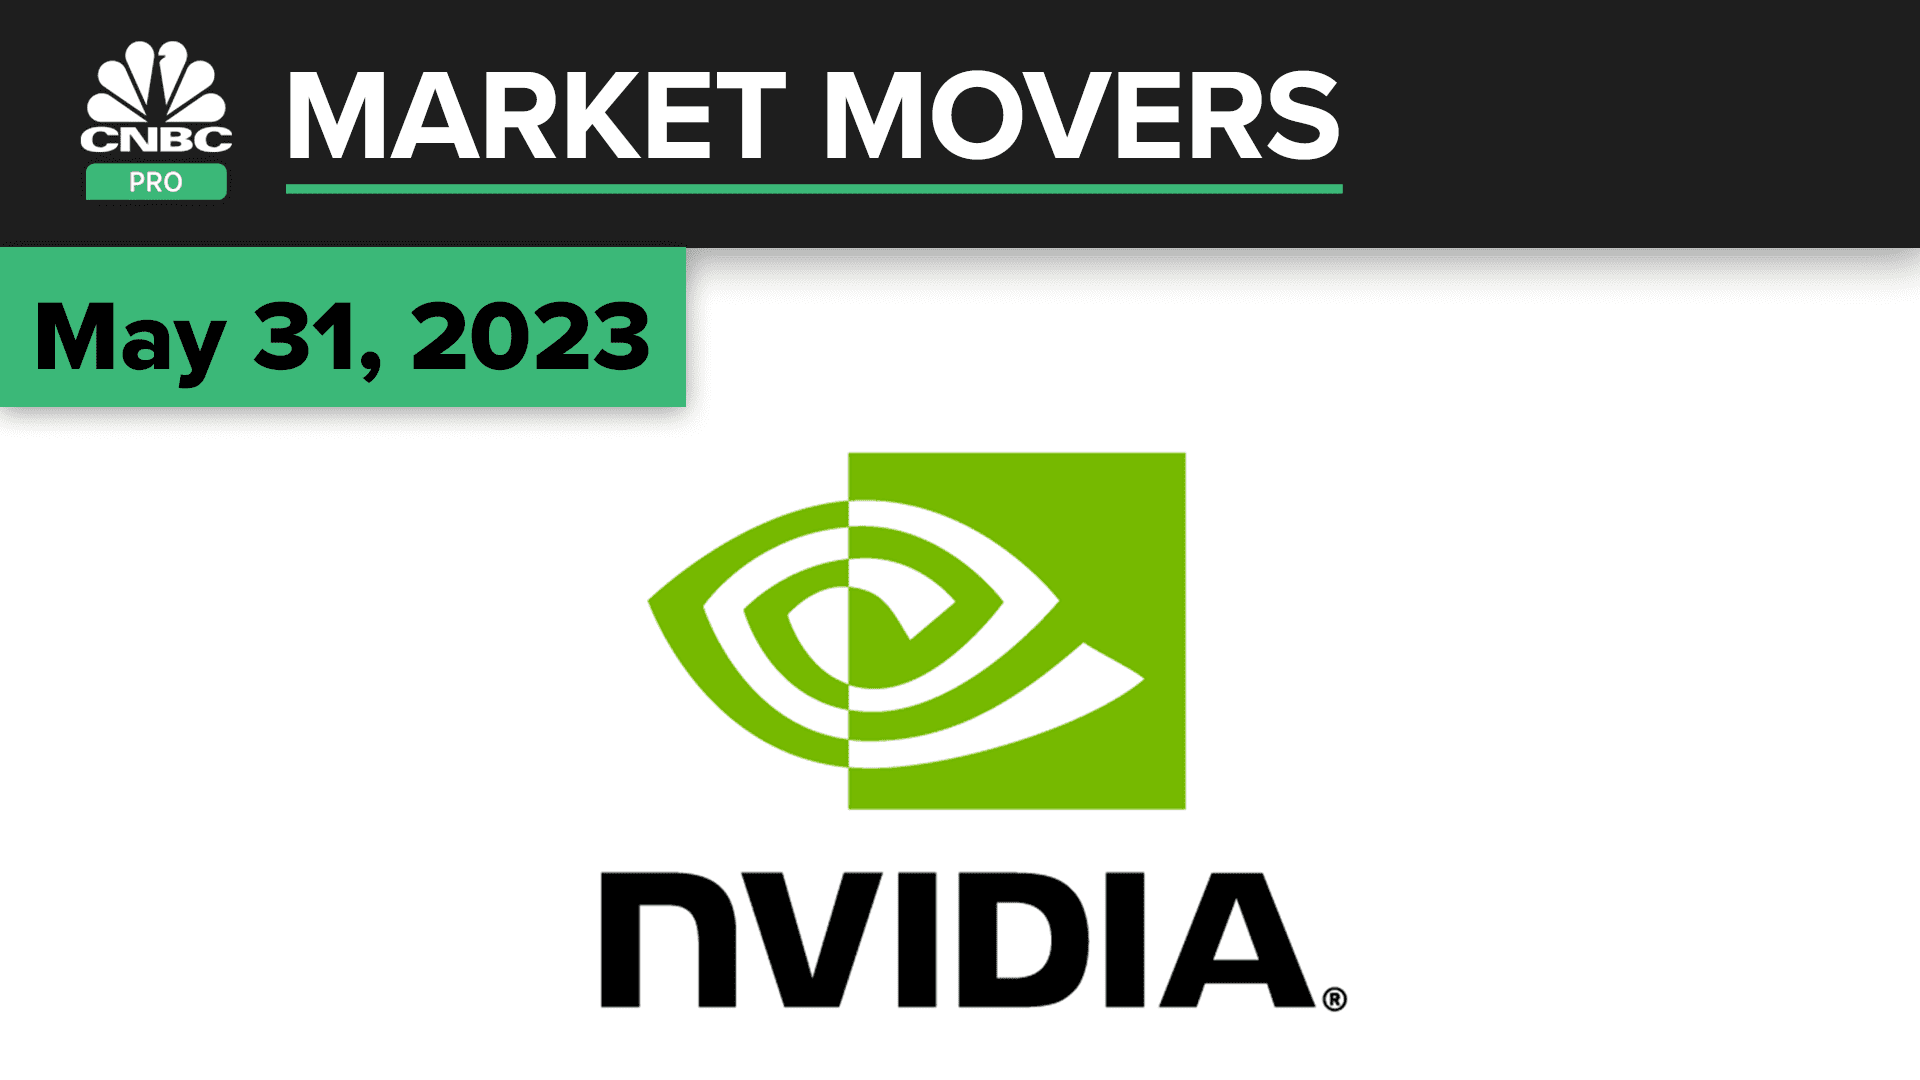 Nvidia shares pull back after recent surge. Here’s what the pros have to say